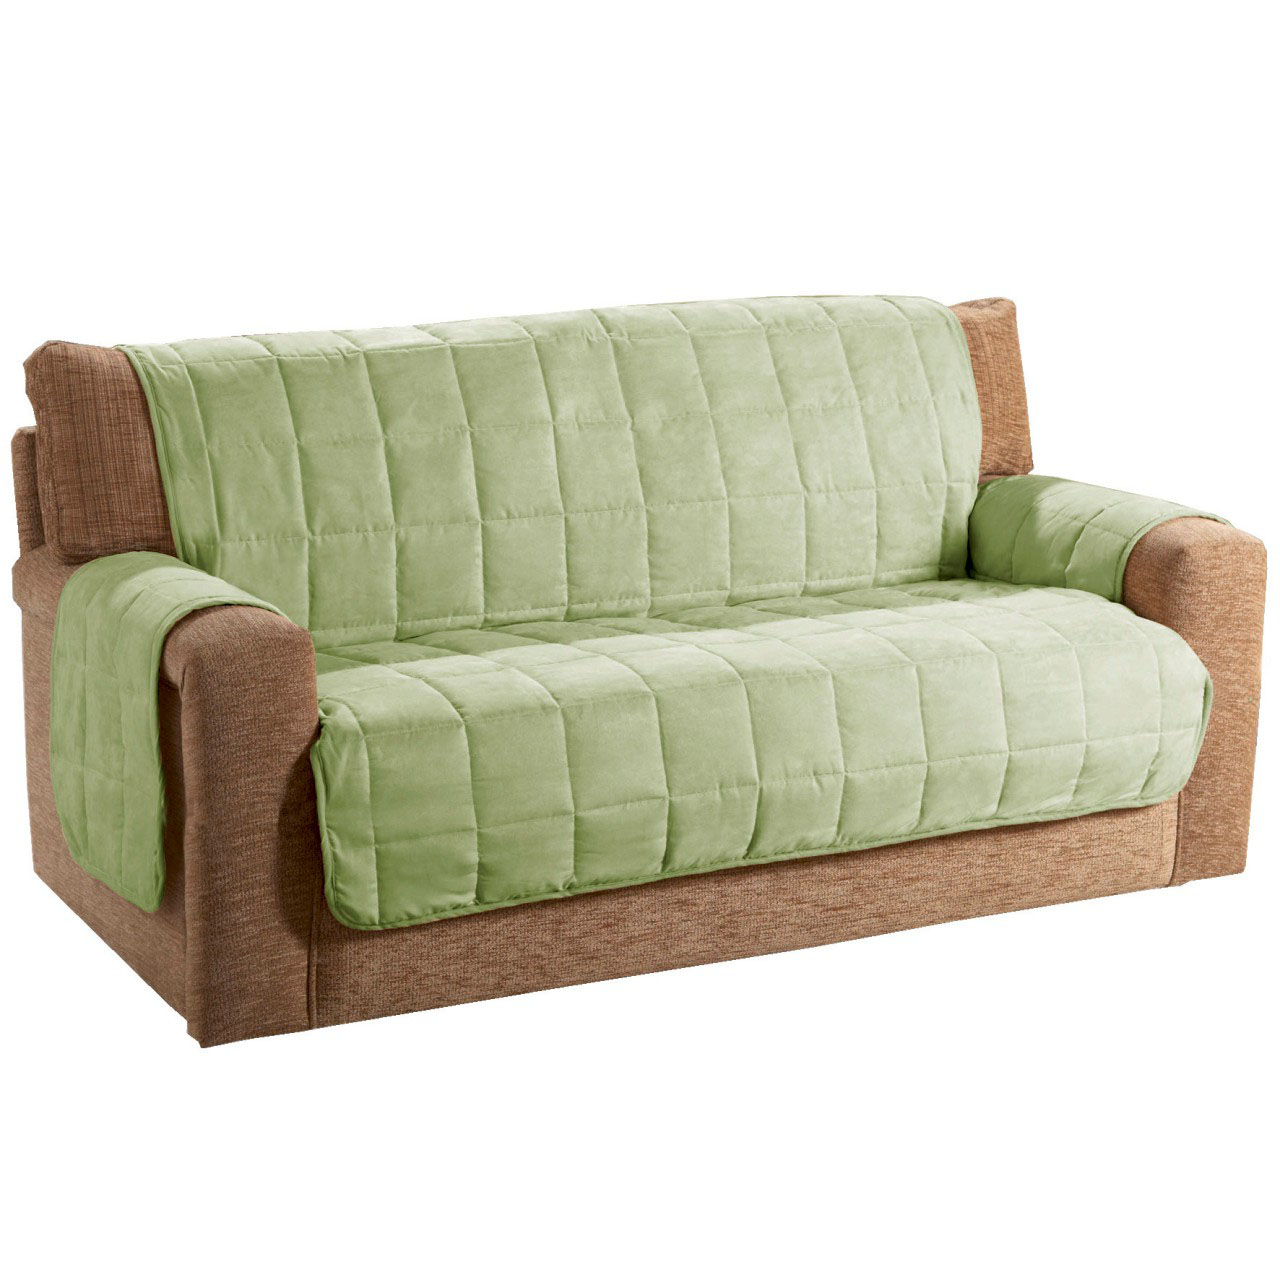 Faux Suede 3-seater Sofa Cover